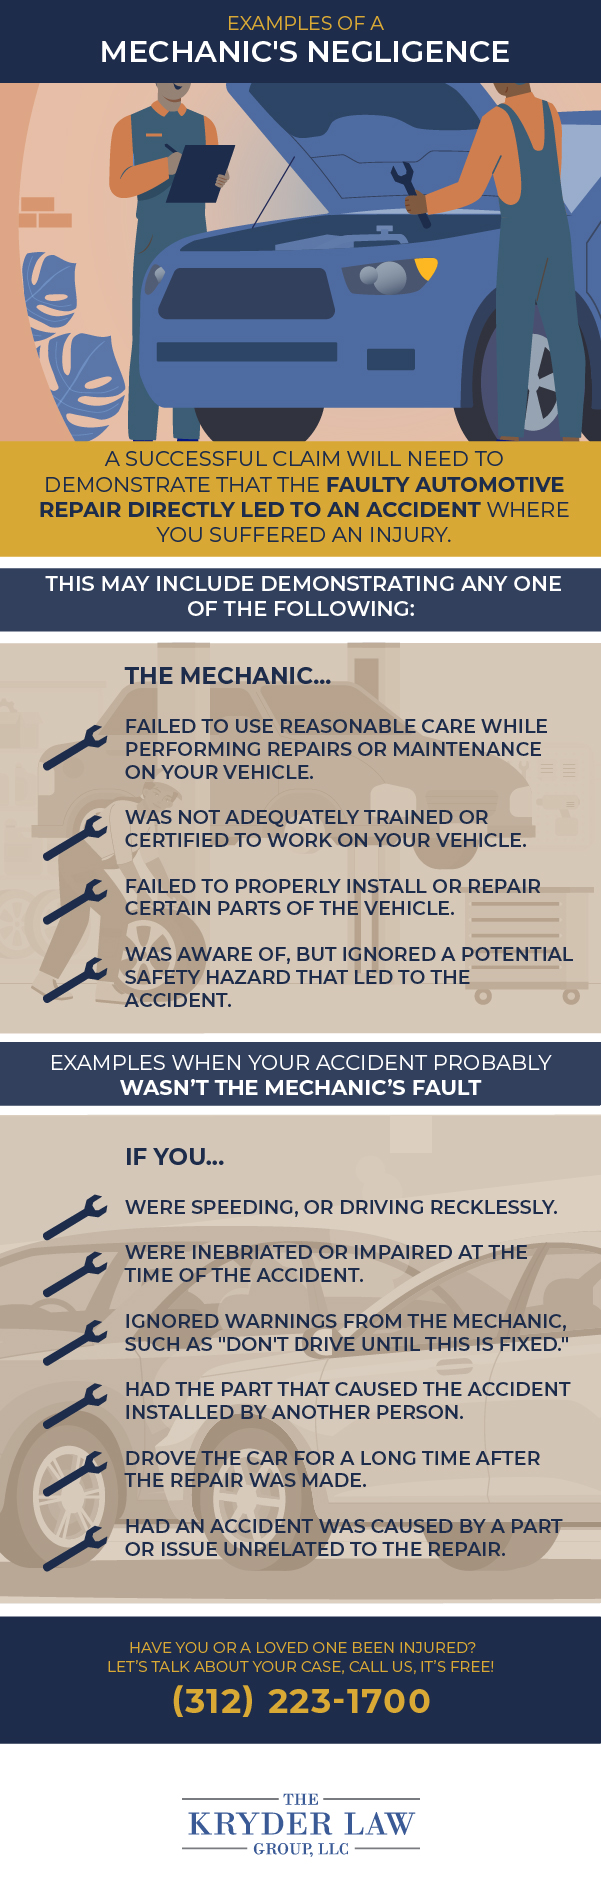 Examples of a Mechanic's Negligence